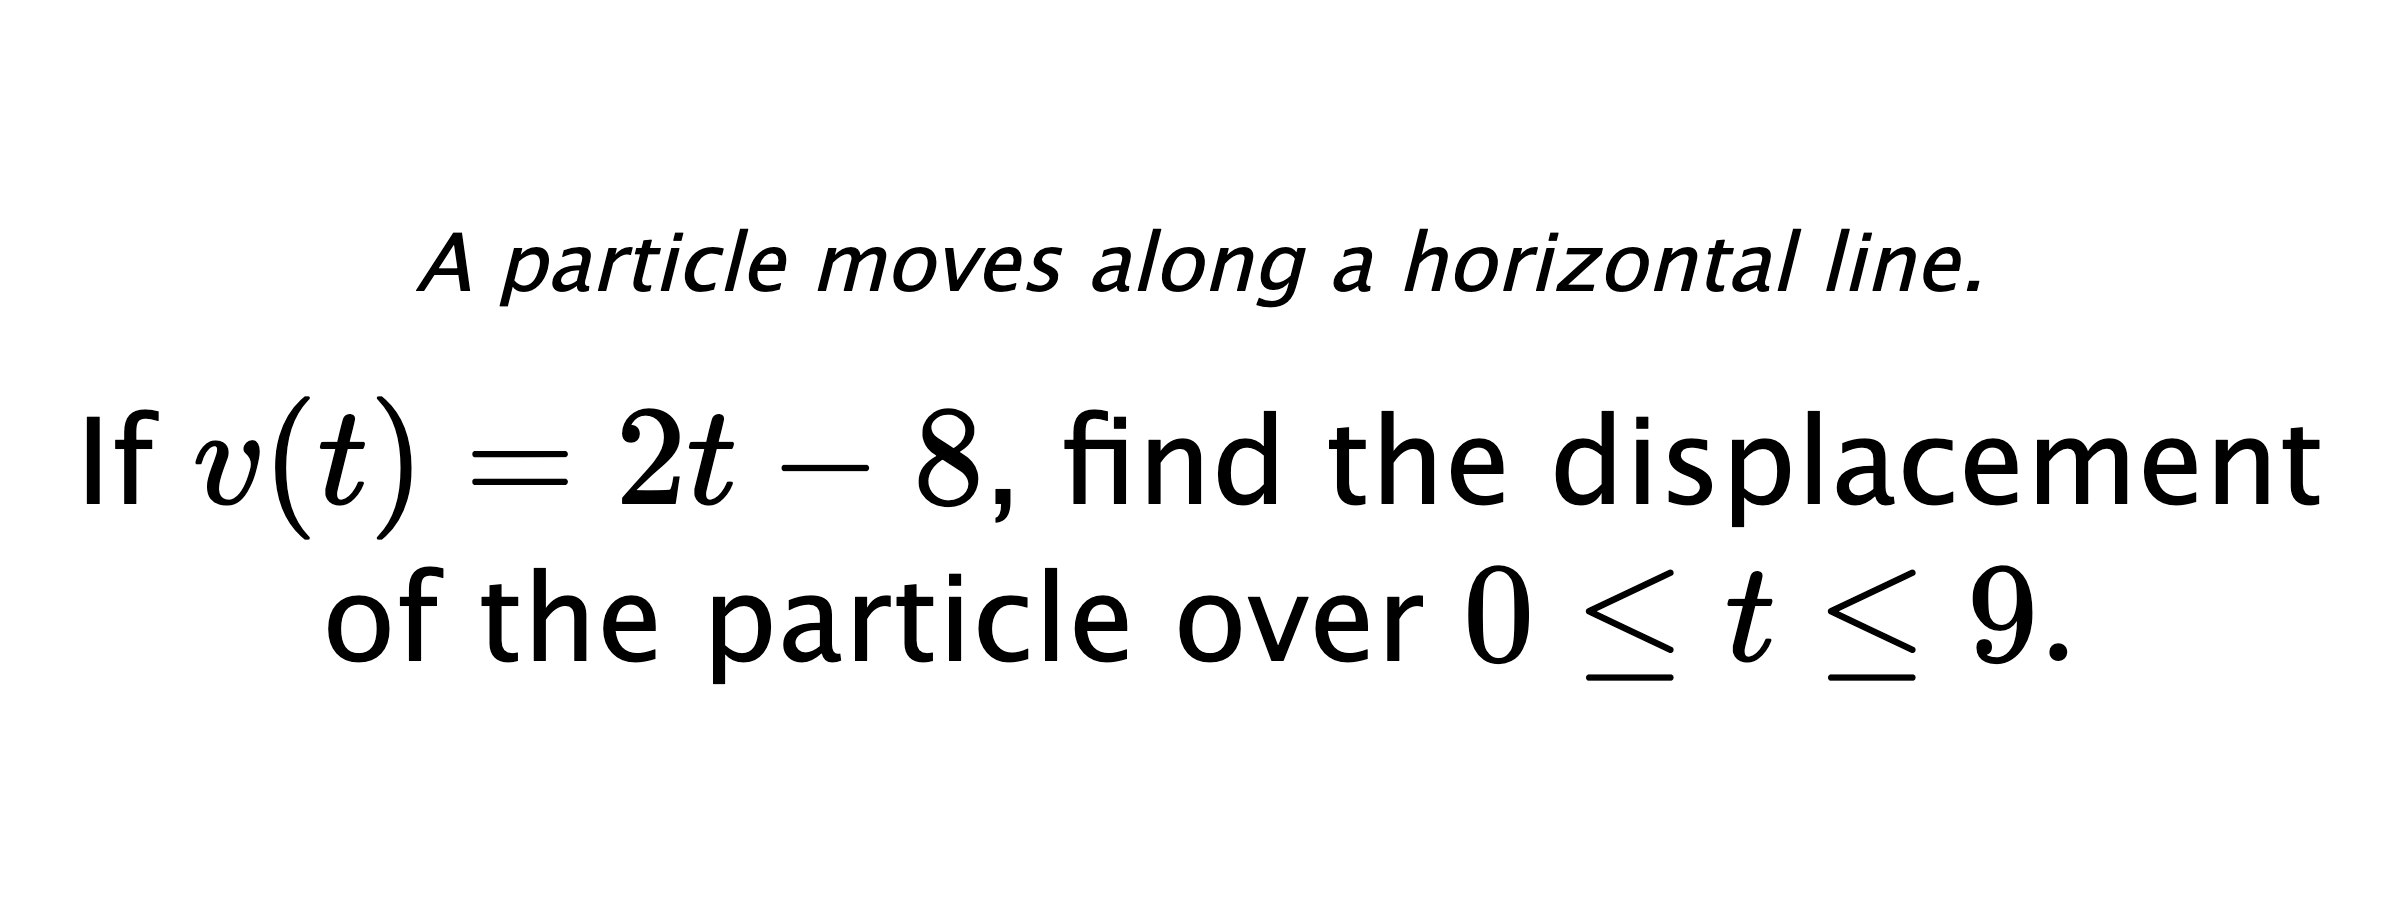 A particle moves along a horizontal line. If $ v(t)=2t-8 $, find the displacement of the particle over $ 0 \leq t \leq 9 .$